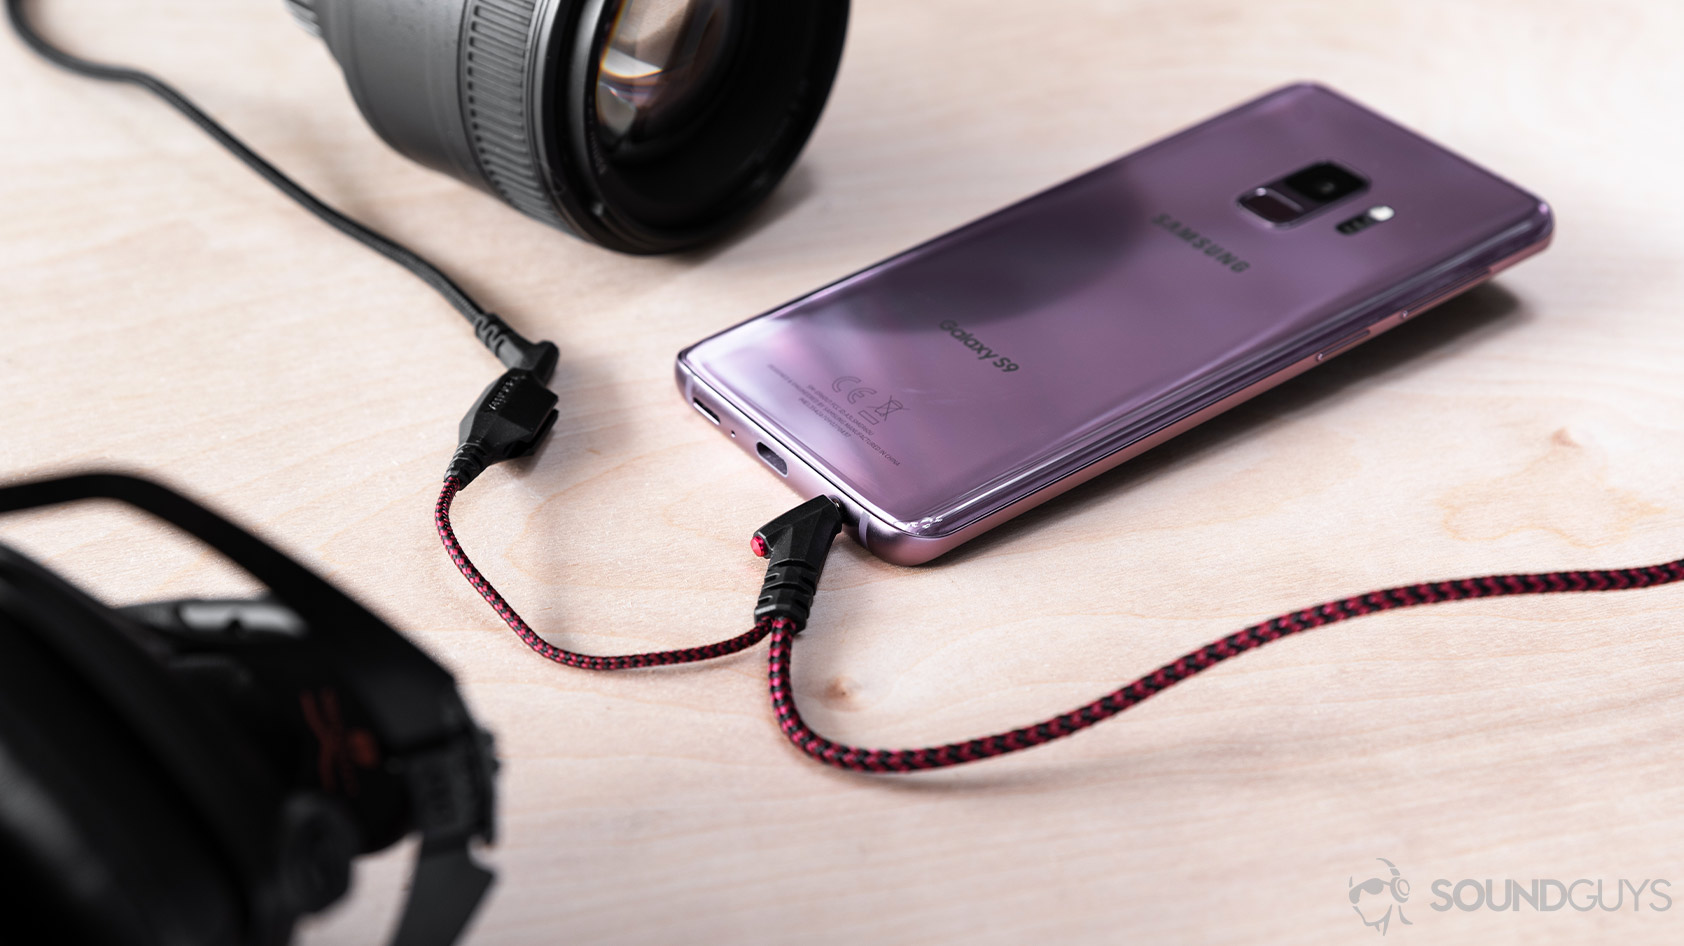 The cables provided plugged into a Samsung Galaxy S9.